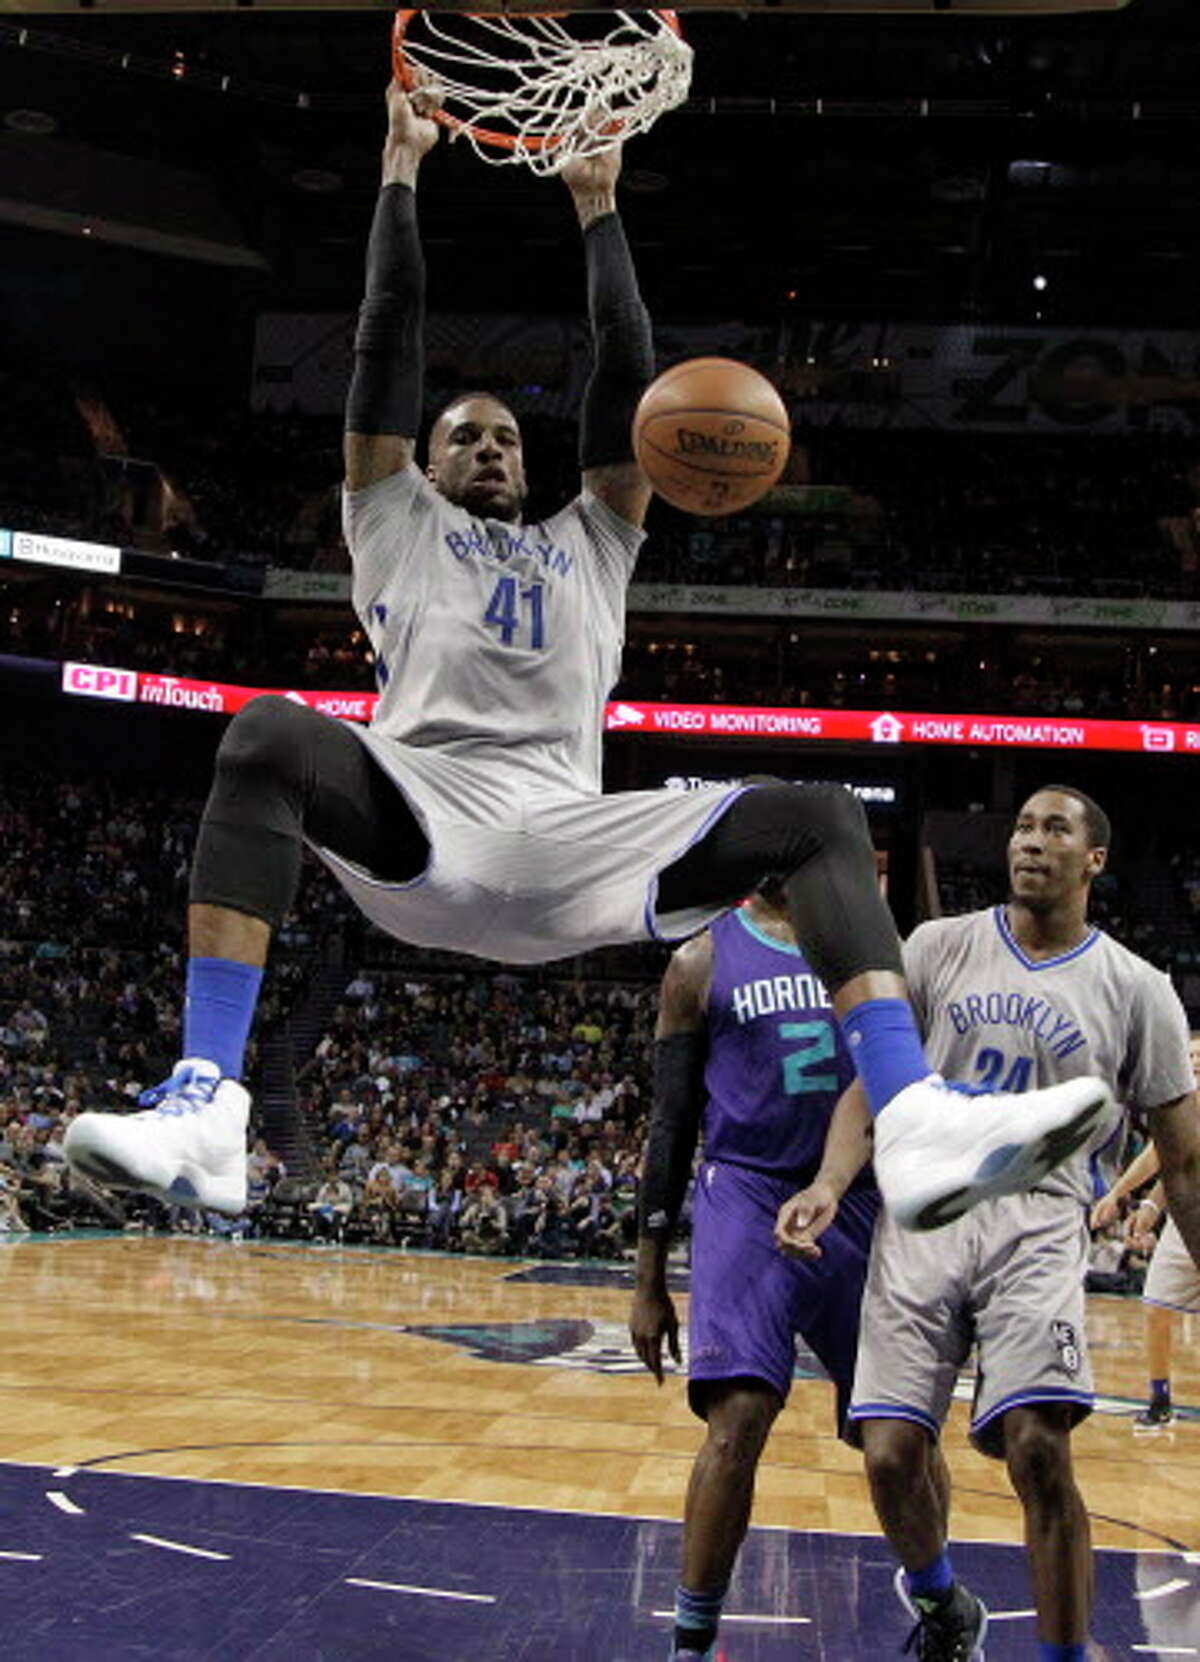 Brooklyn Nets' Thomas Robinson (41) dunks against the Charlotte Hornets in the second half of an NBA basketball game in Charlotte, N.C., Friday, April 8, 2016. The Hornets won 113-99. (AP Photo/Chuck Burton)